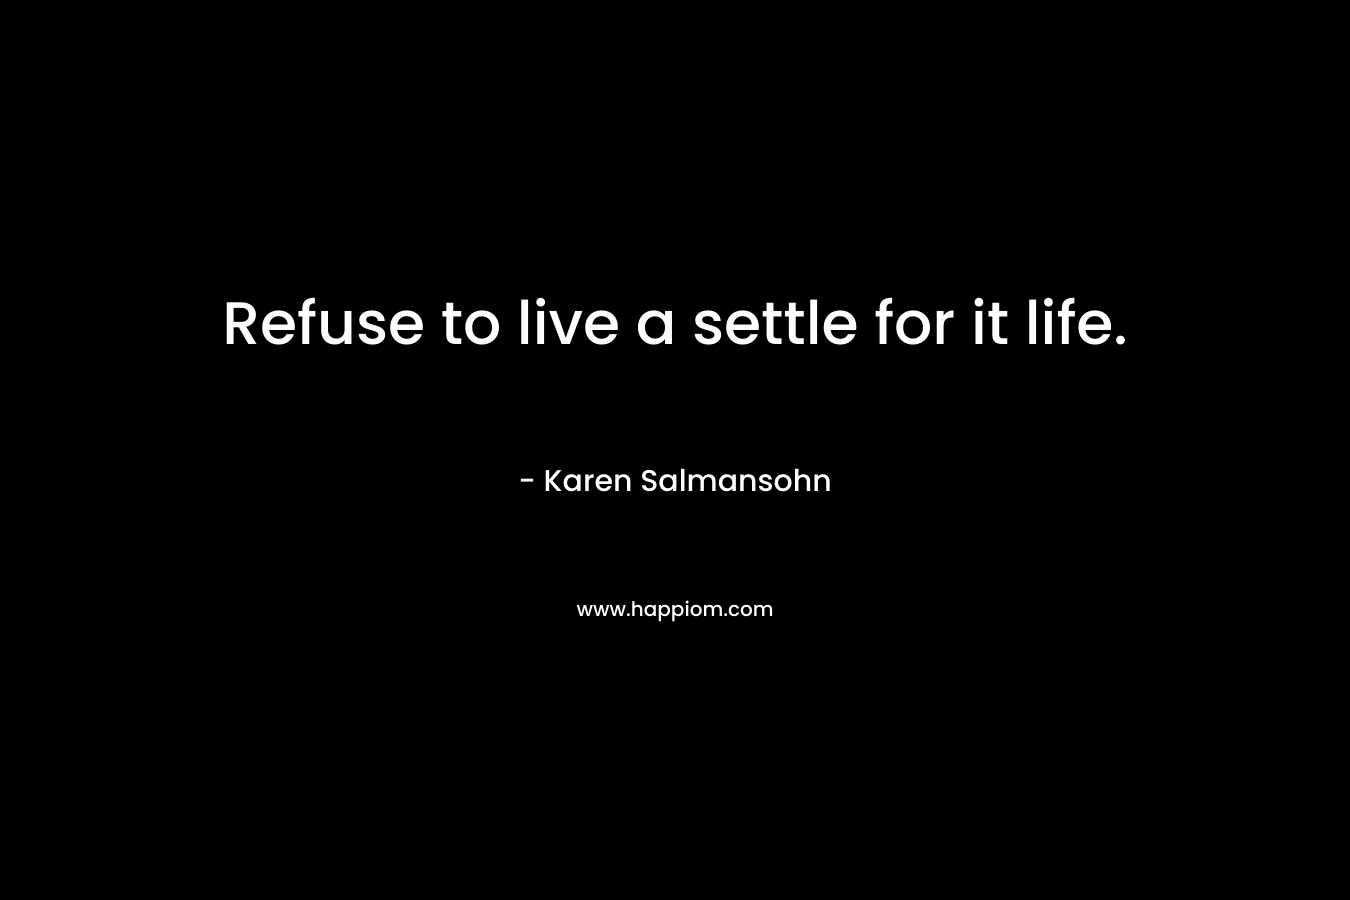 Refuse to live a settle for it life.